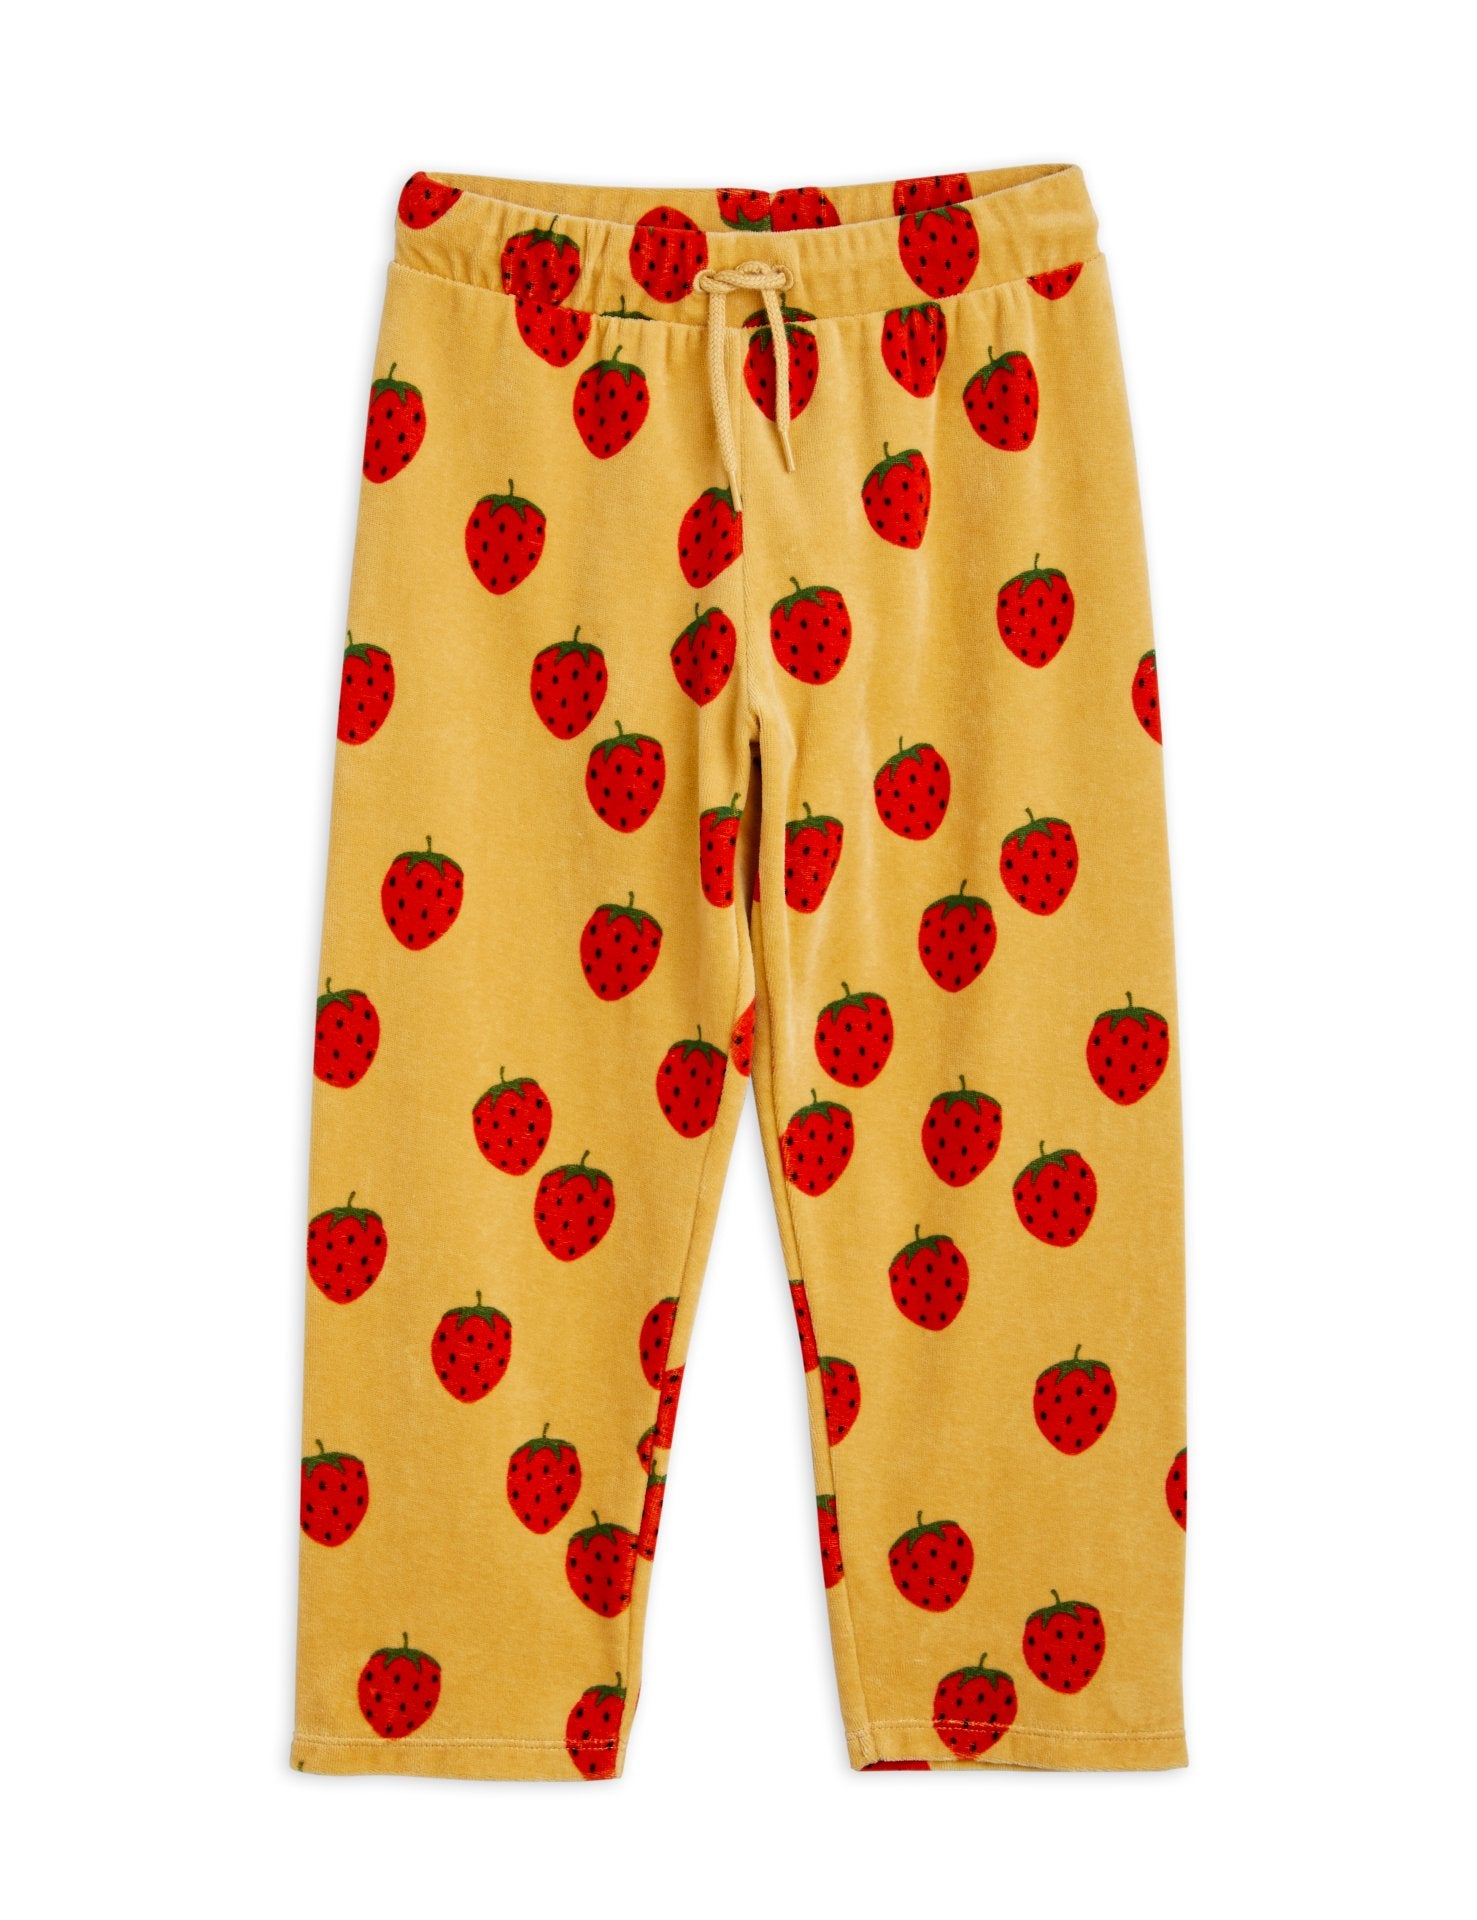 Strawberries velour aop trousers